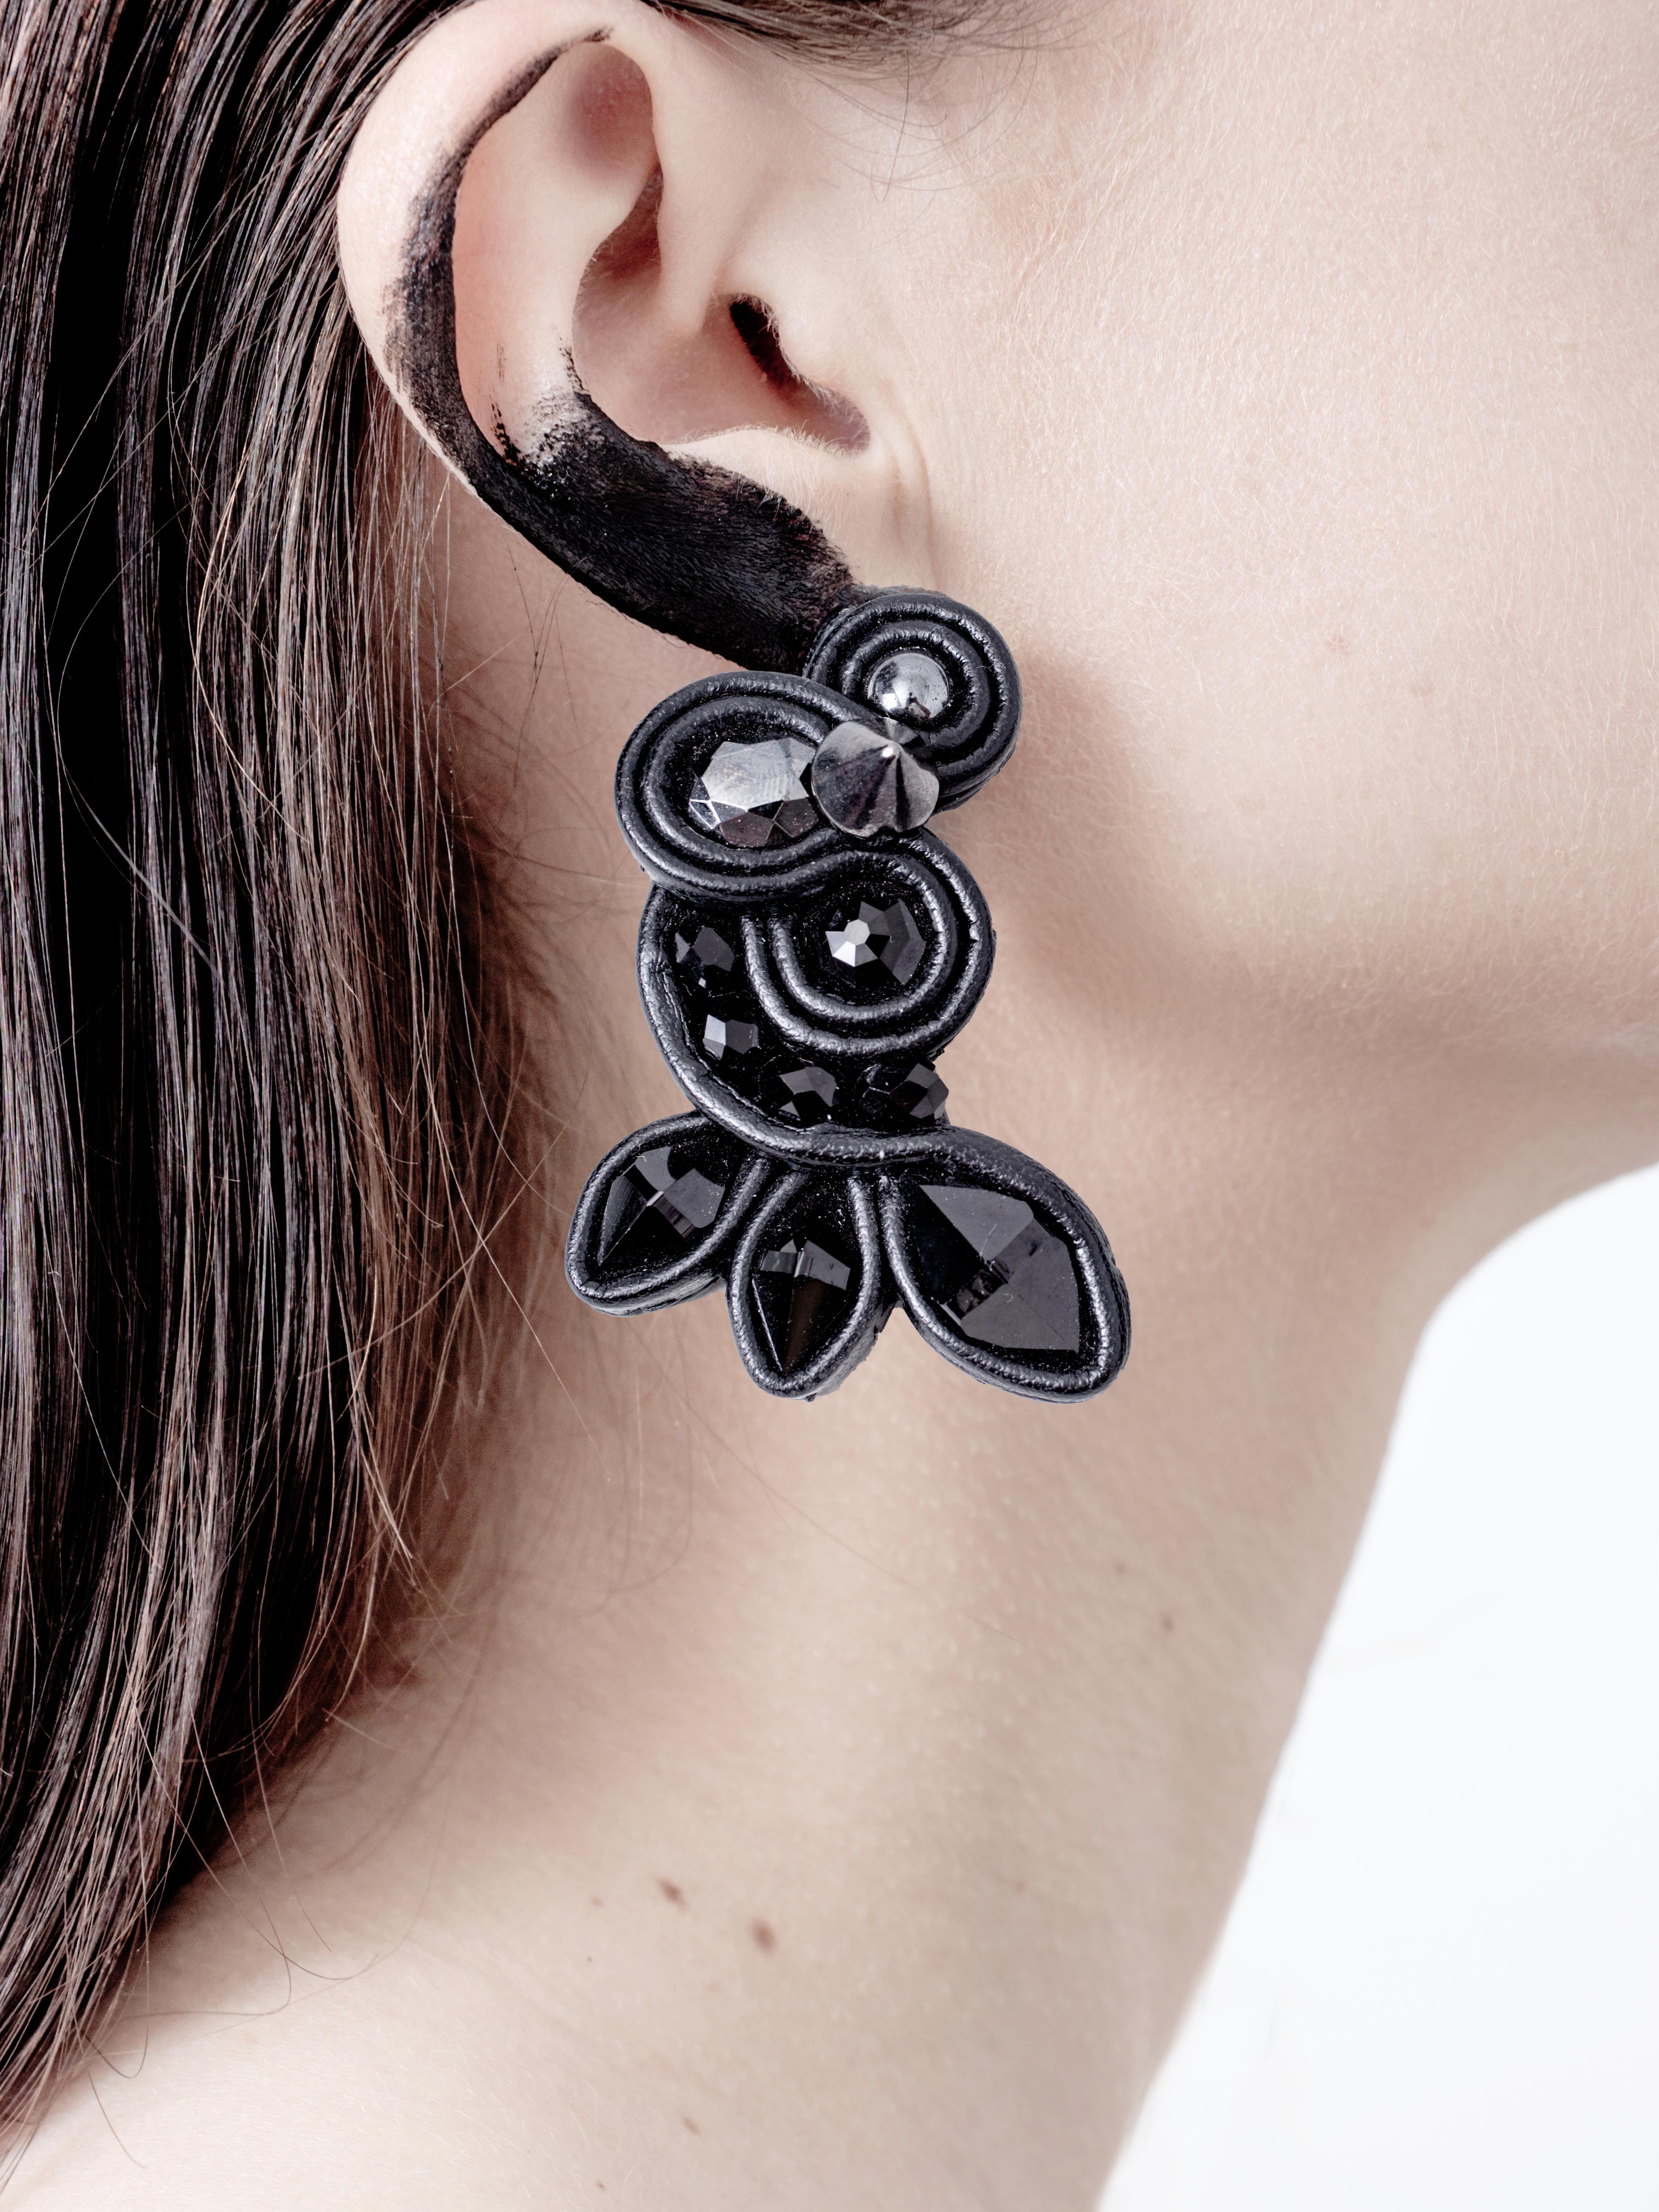 Designed by Julie Eulalie who was inspired by the artist Pierre Soulage for this collection. Made of leather, faceted crystal cabochons and hematites
Julie finally chooses to express her talent through 